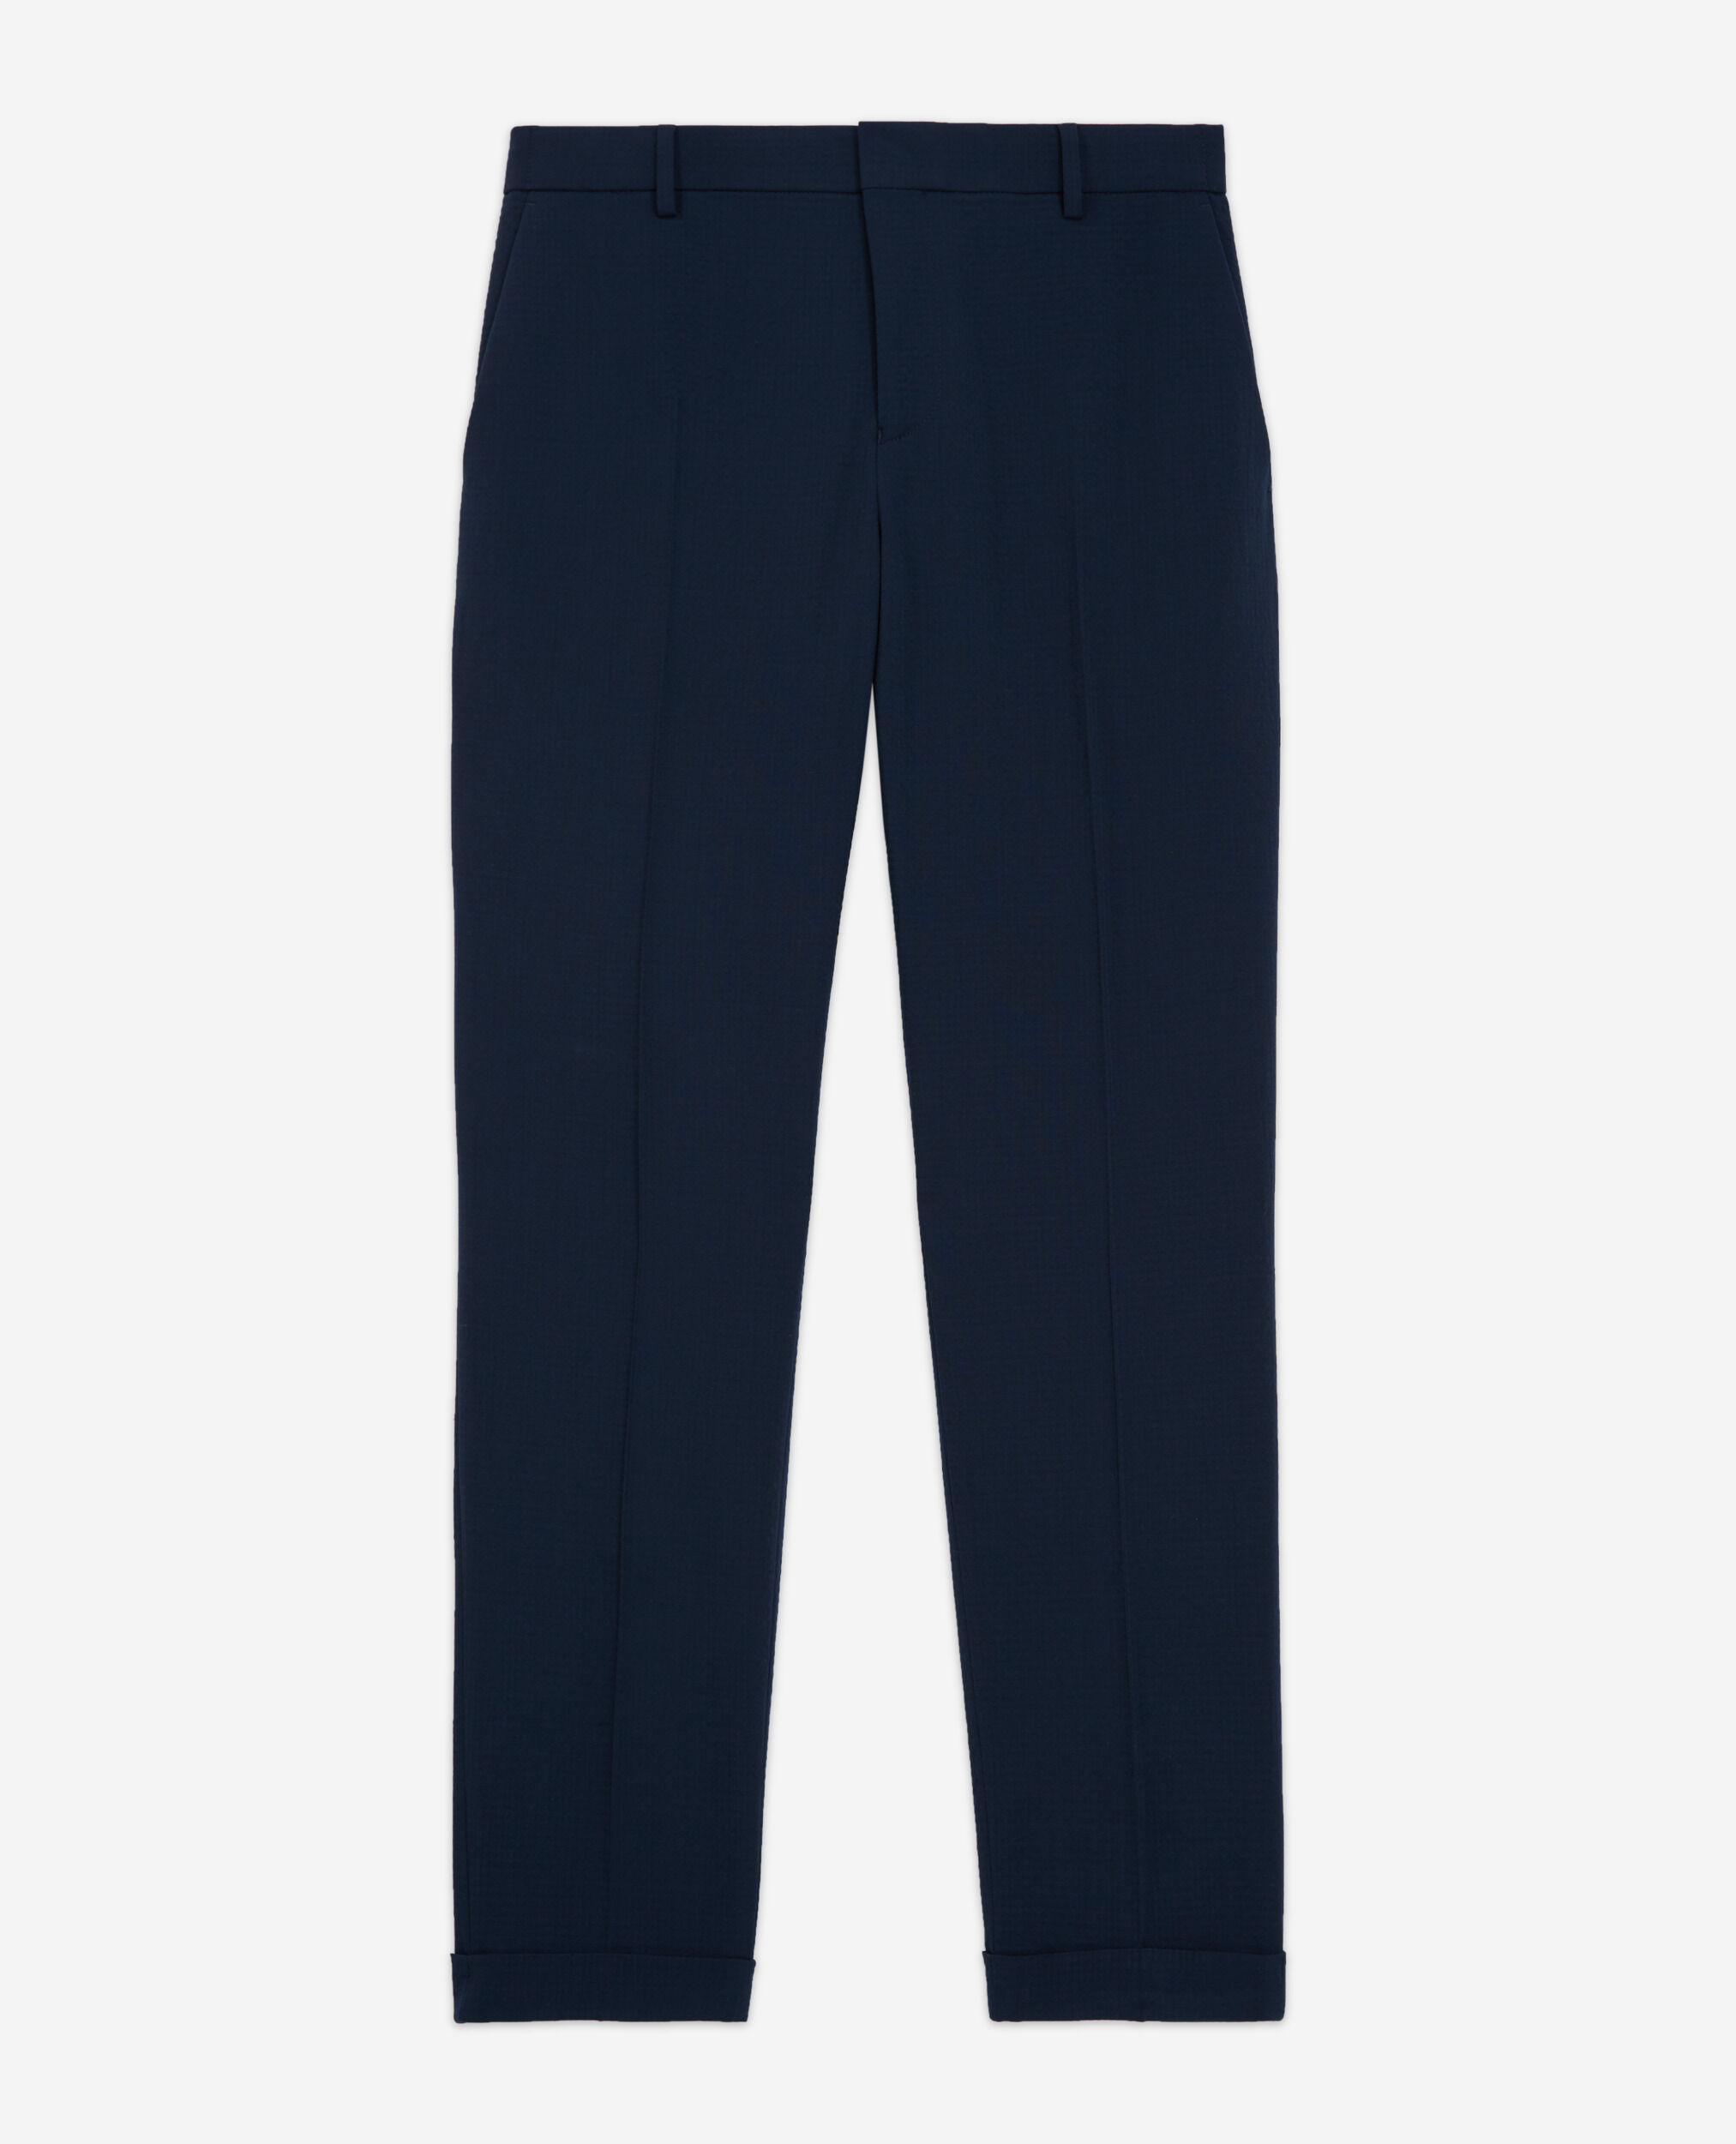 Pleated navy blue wool suit pants, NAVY, hi-res image number null